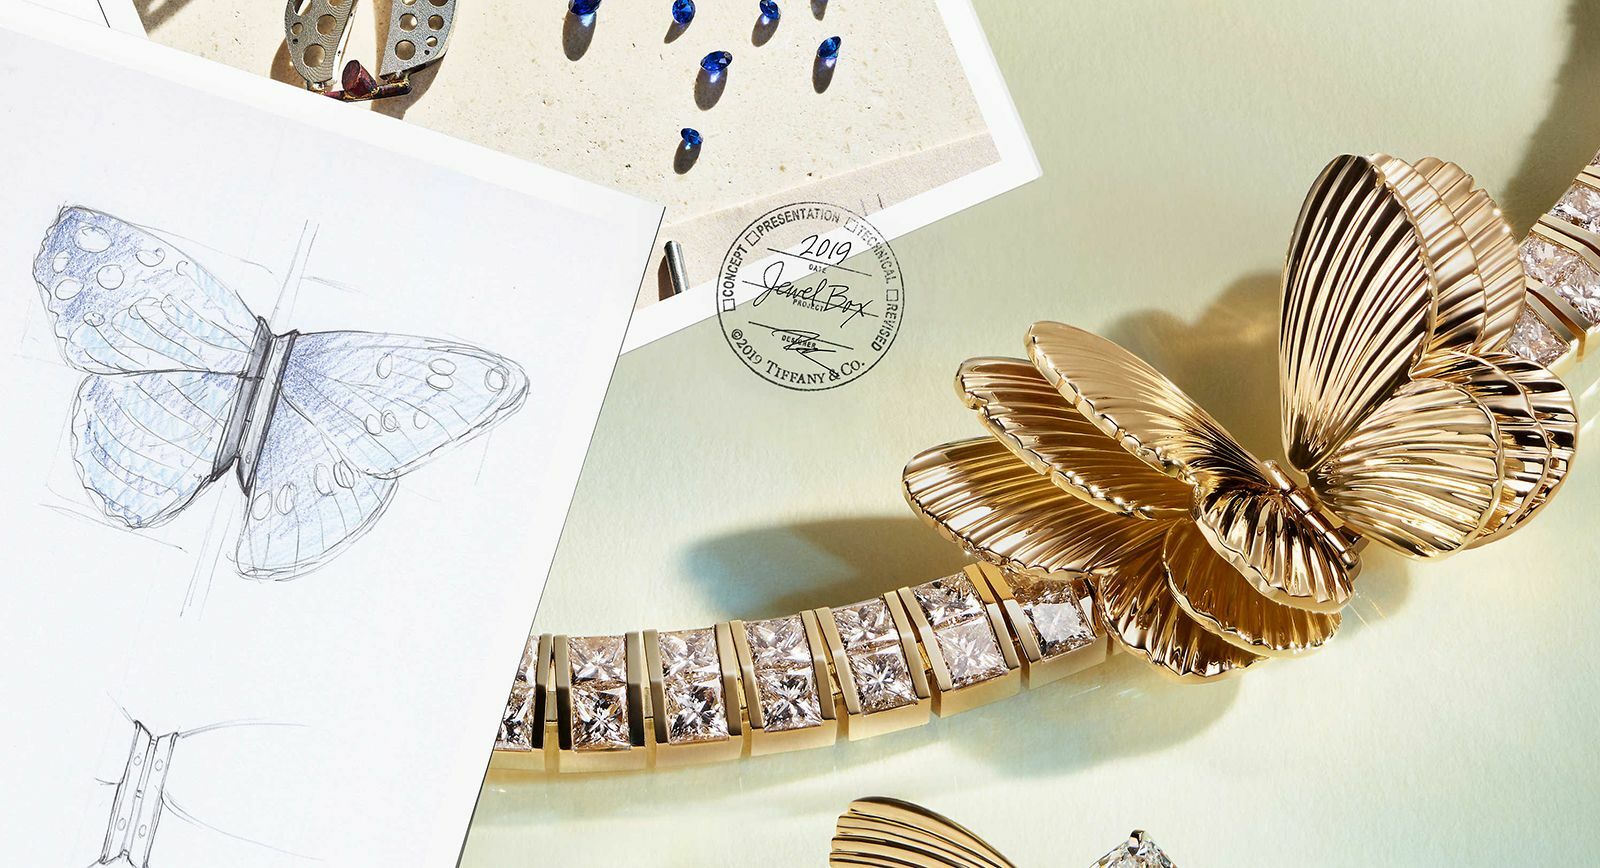 Tiffany&Co. Blue Book 2019 high jewellery collection